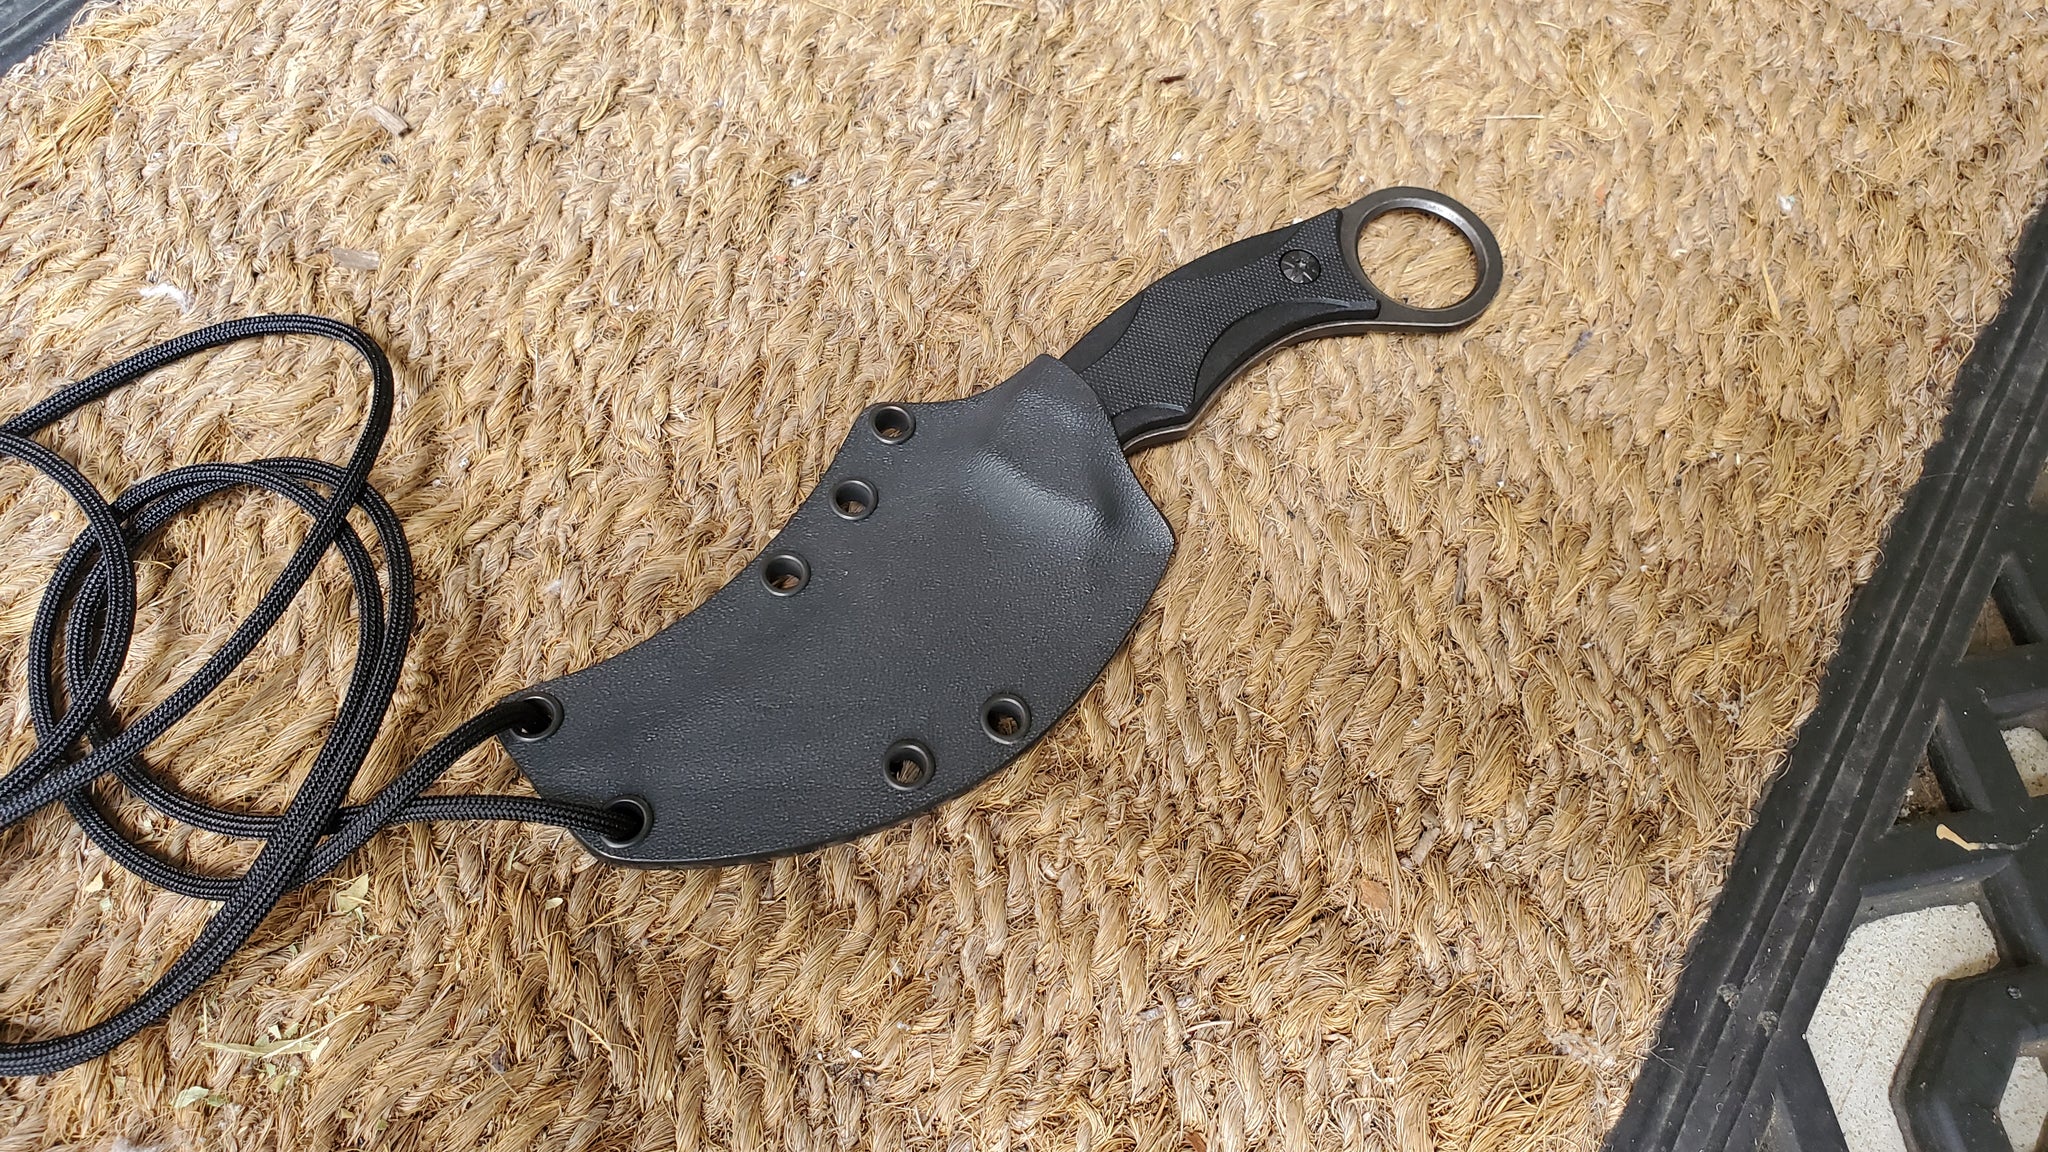 SMITH & WESSON SW995 Pancake Style Custom Kydex Sheath in Neck Carry